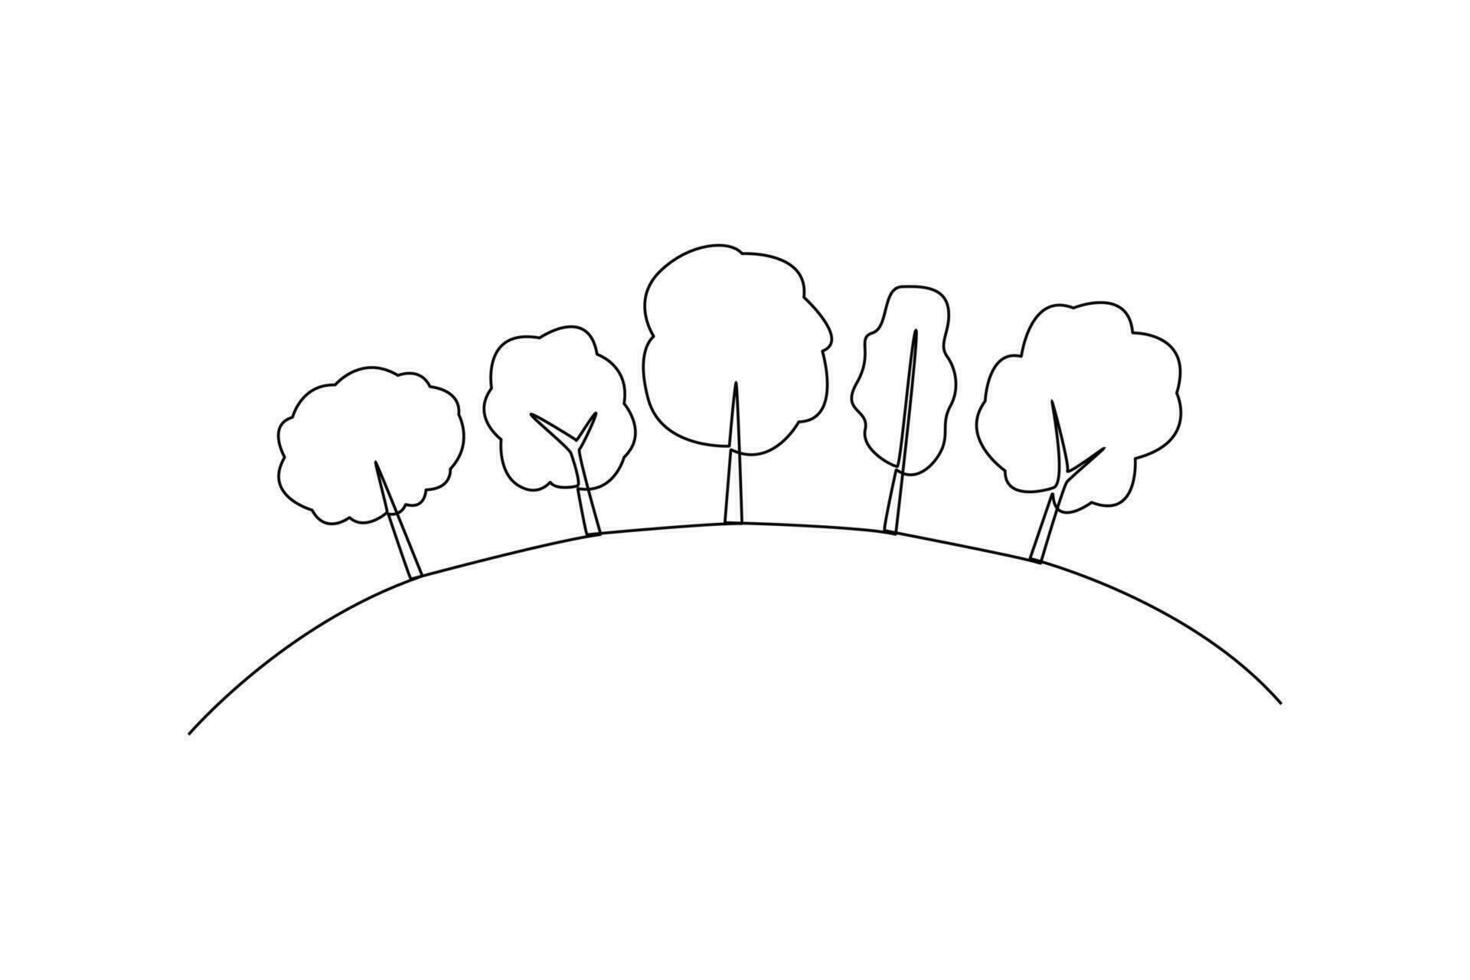 Continuous one line drawing earth and tree. World environment day concept. Single line draw design vector graphic illustration.